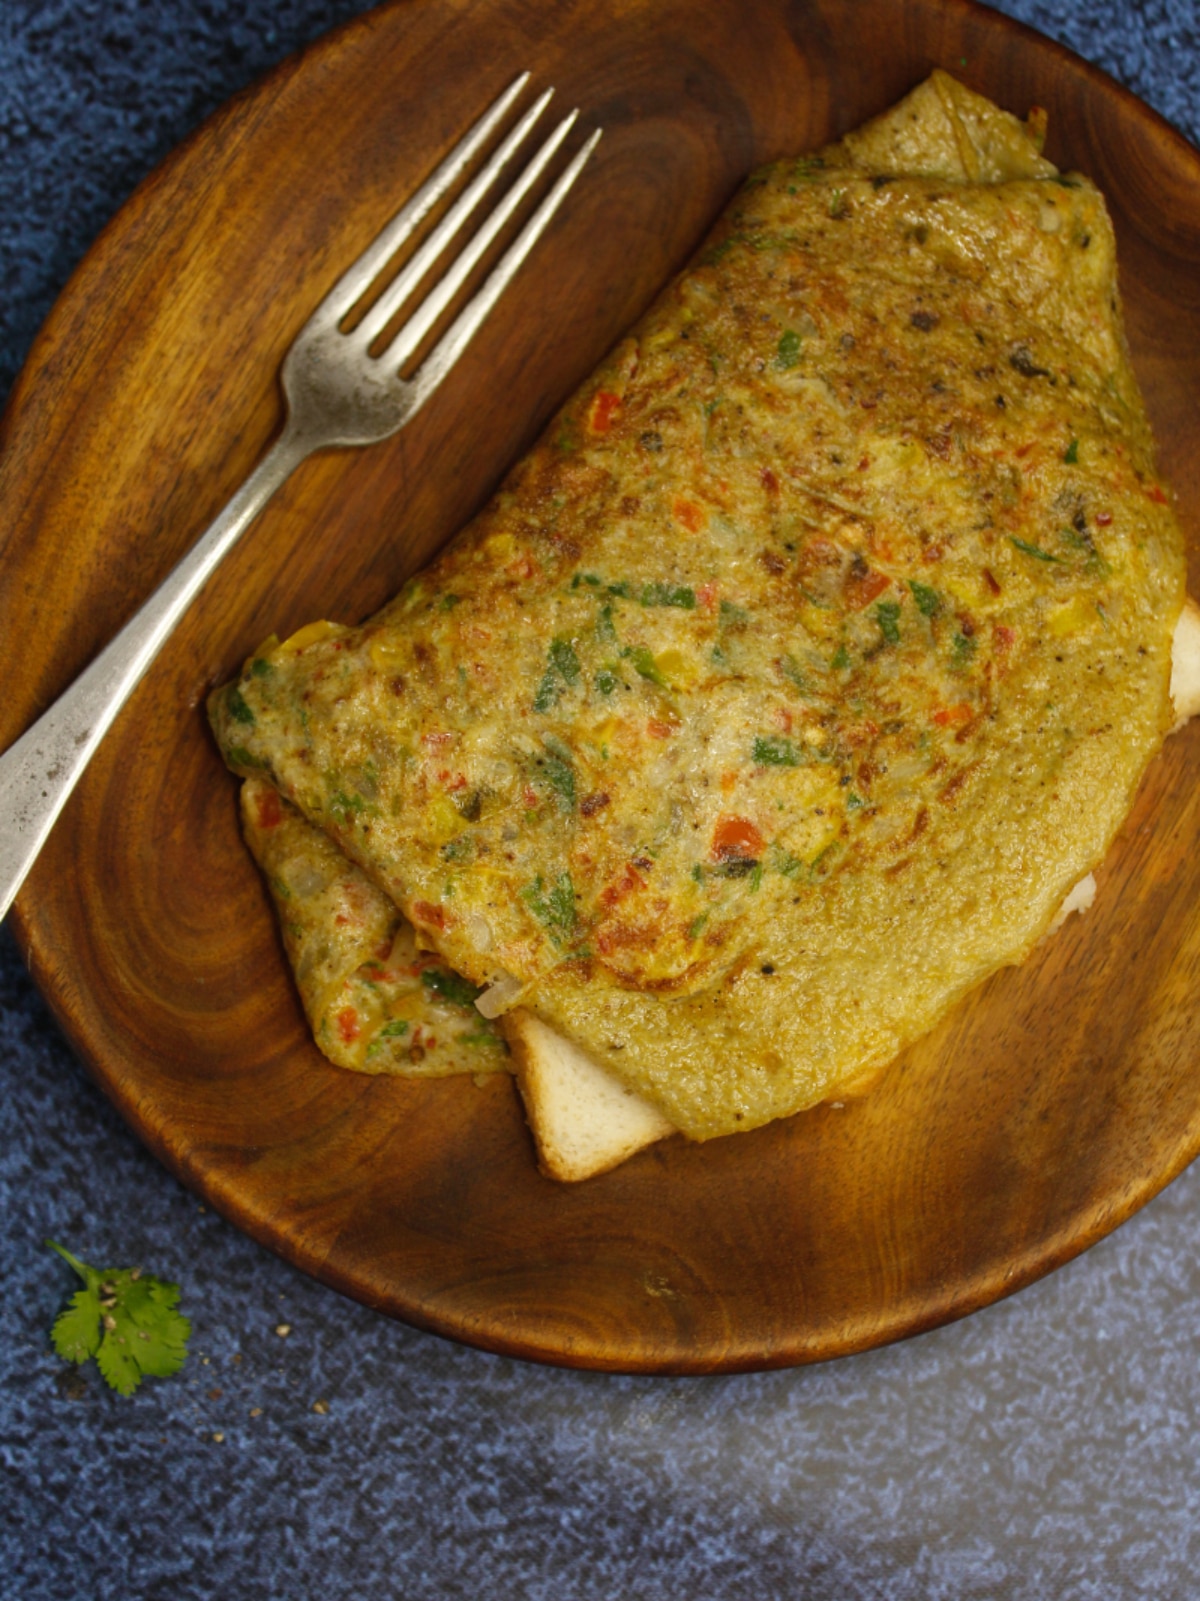 Top view image of Bread Omelet